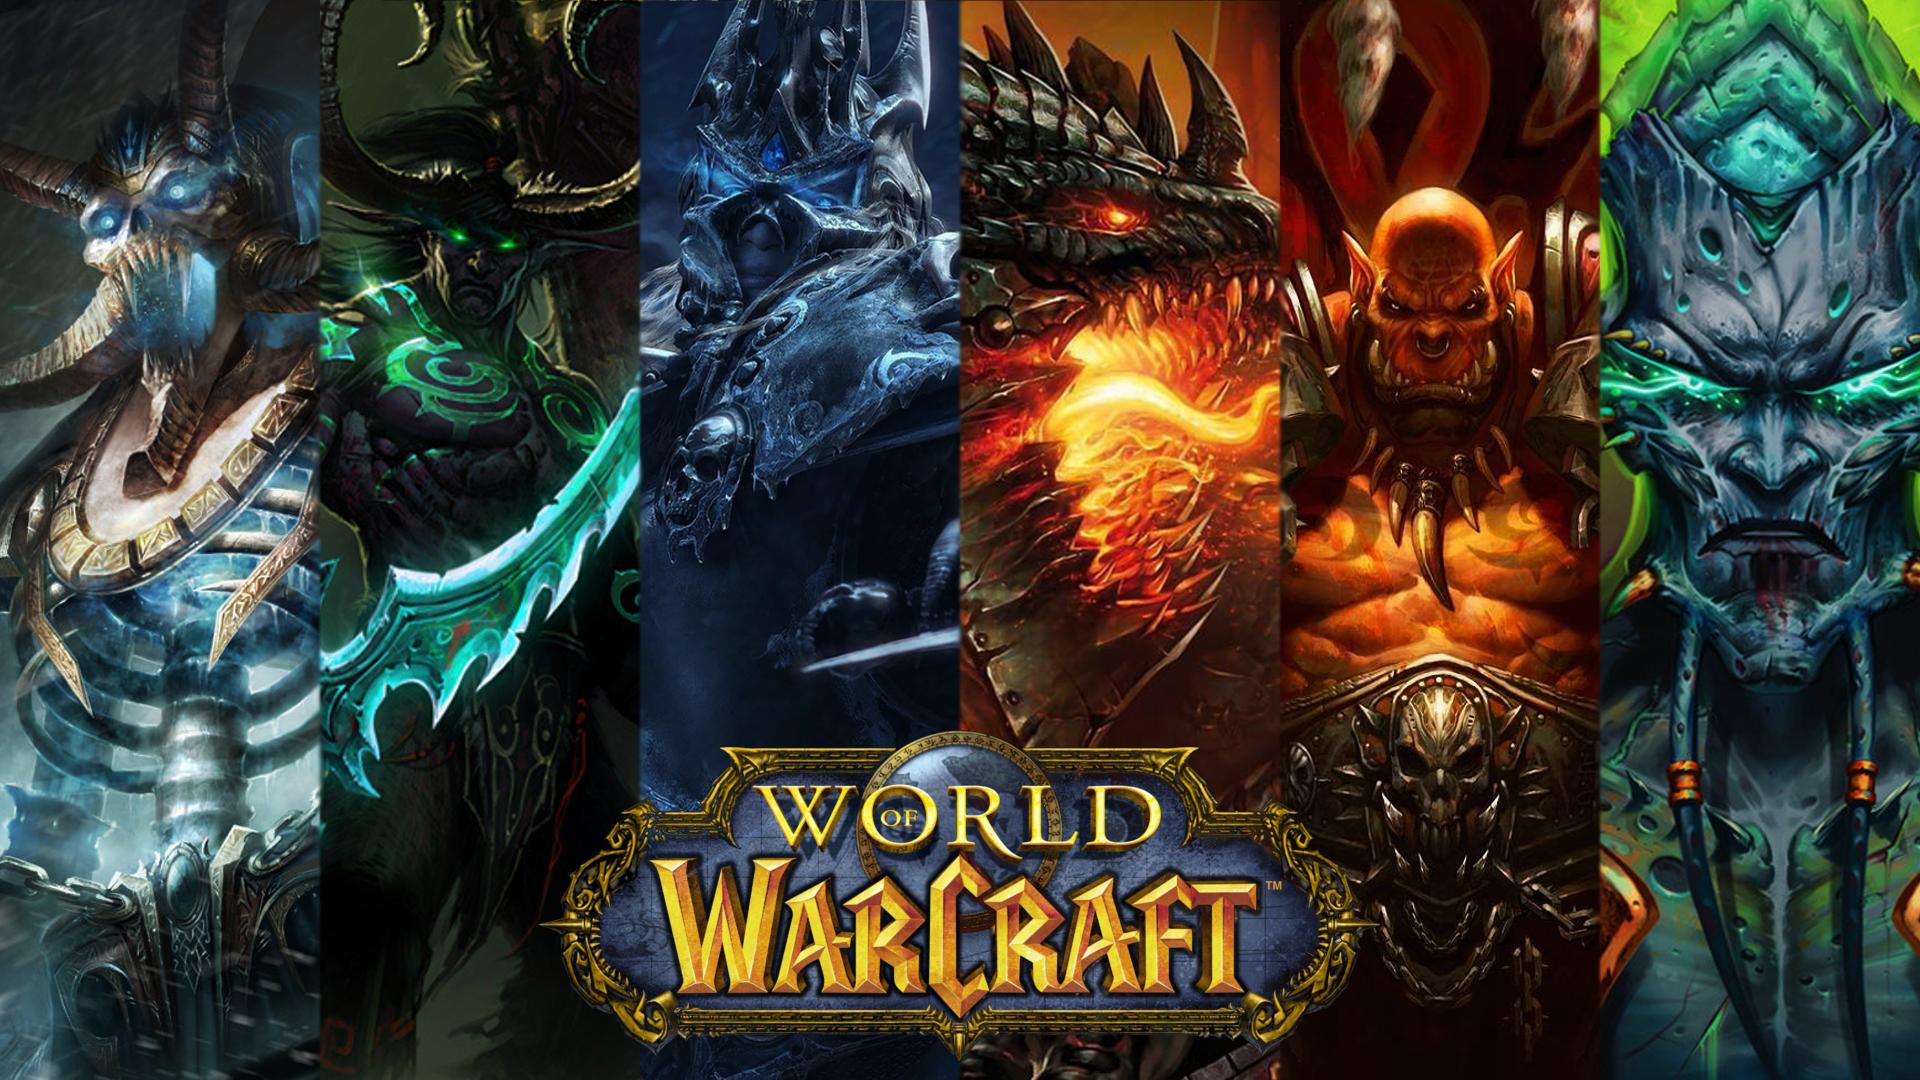 Someone requested an updated WoW Wallpaper, heres what I came up